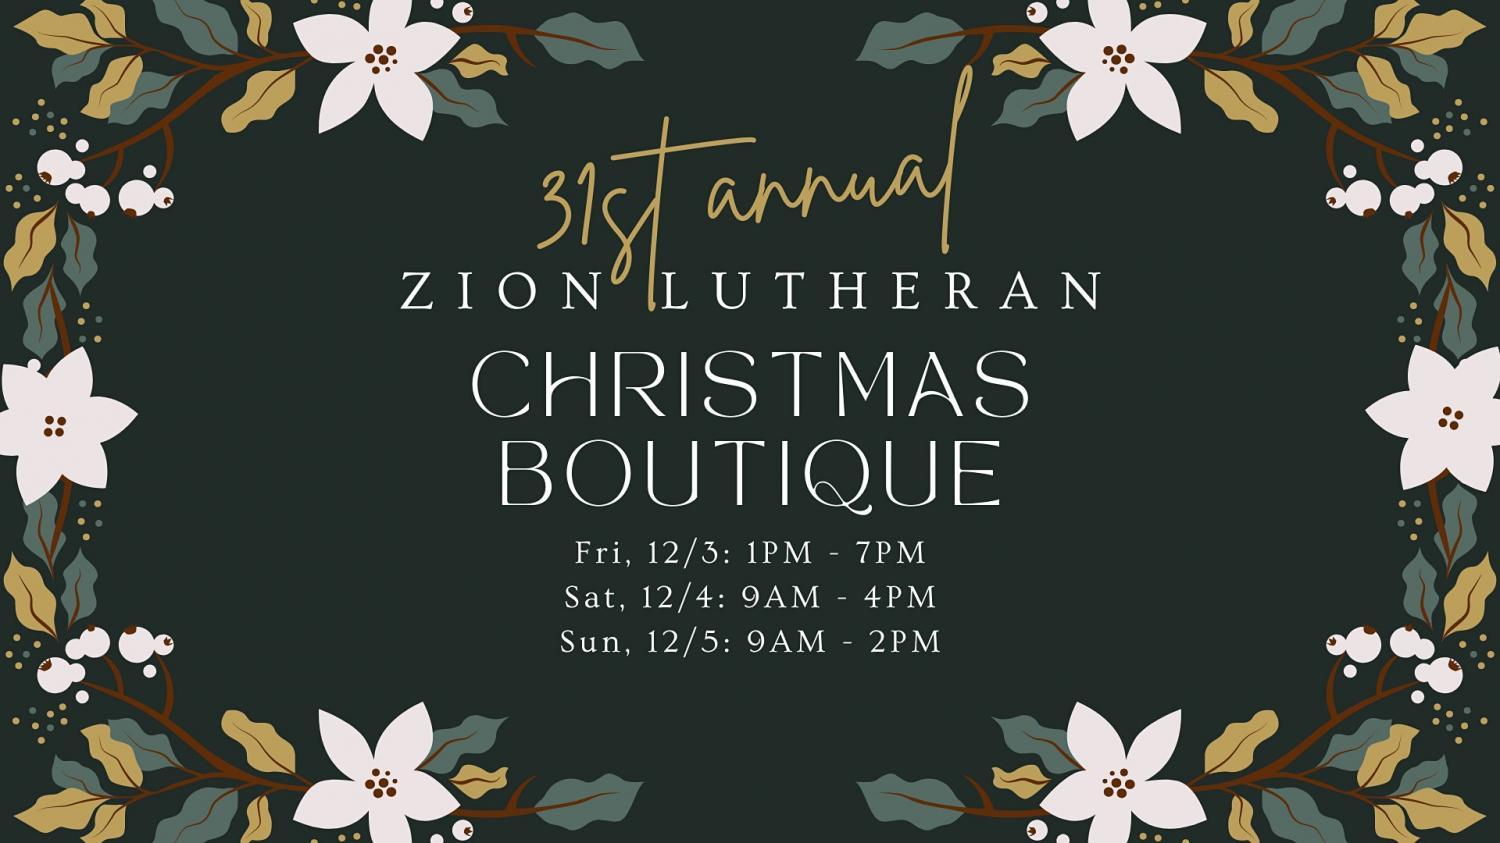 Zion Lutheran's 31st Annual Christmas Boutique